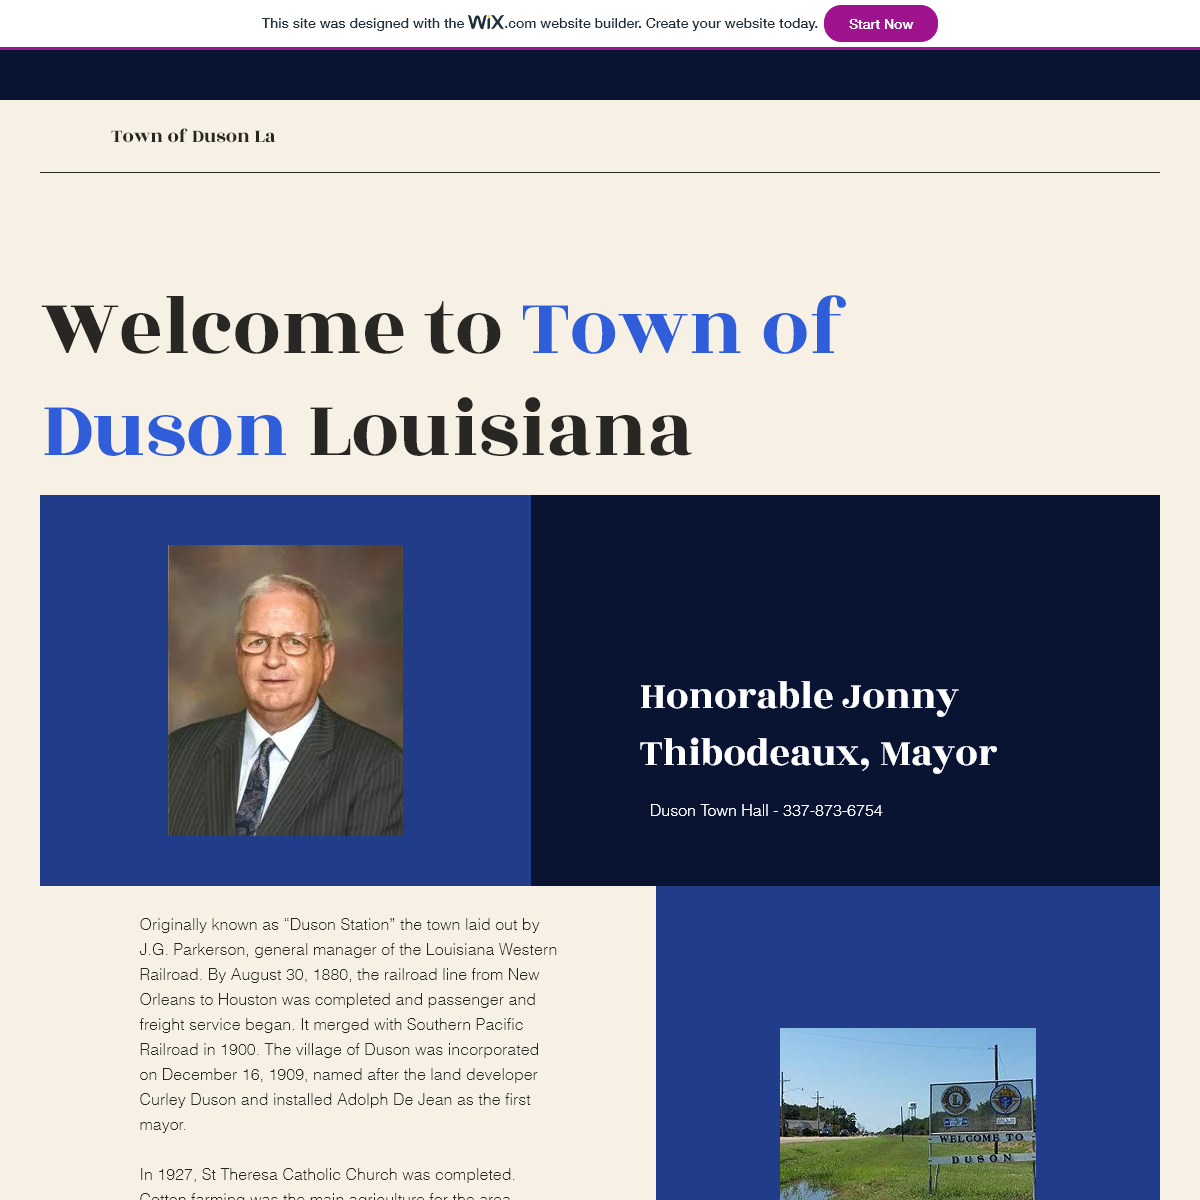 A complete backup of townofduson.com